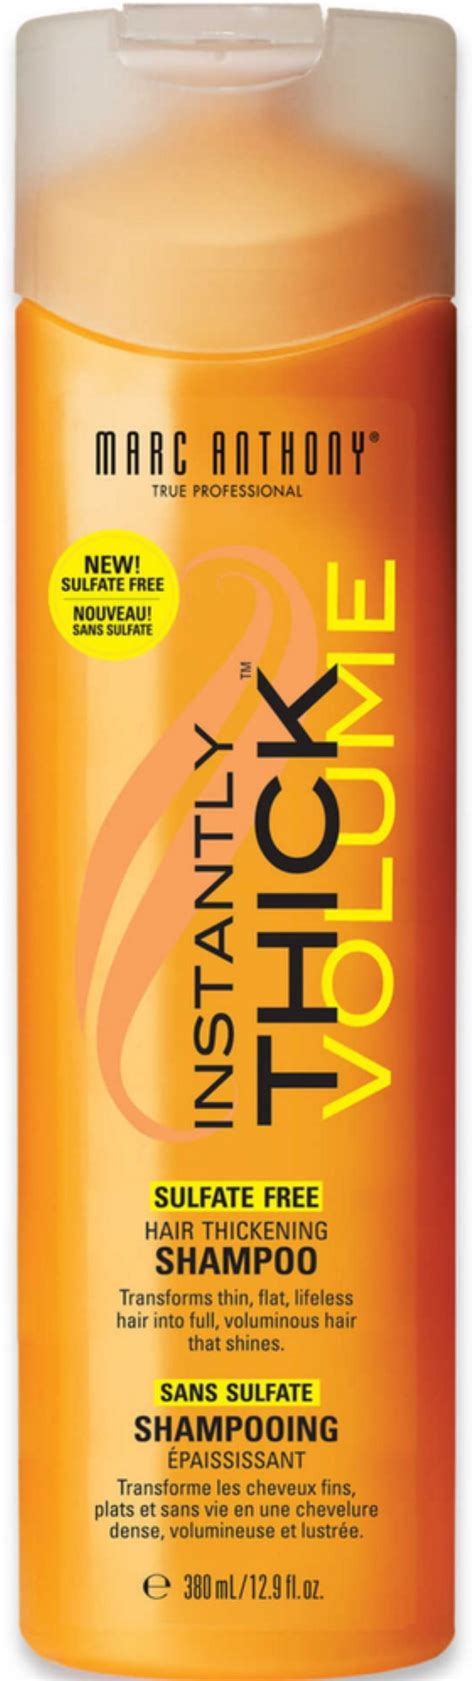 Marc Anthony Instantly Thick Hair Thickening Shampoo 1290 Oz